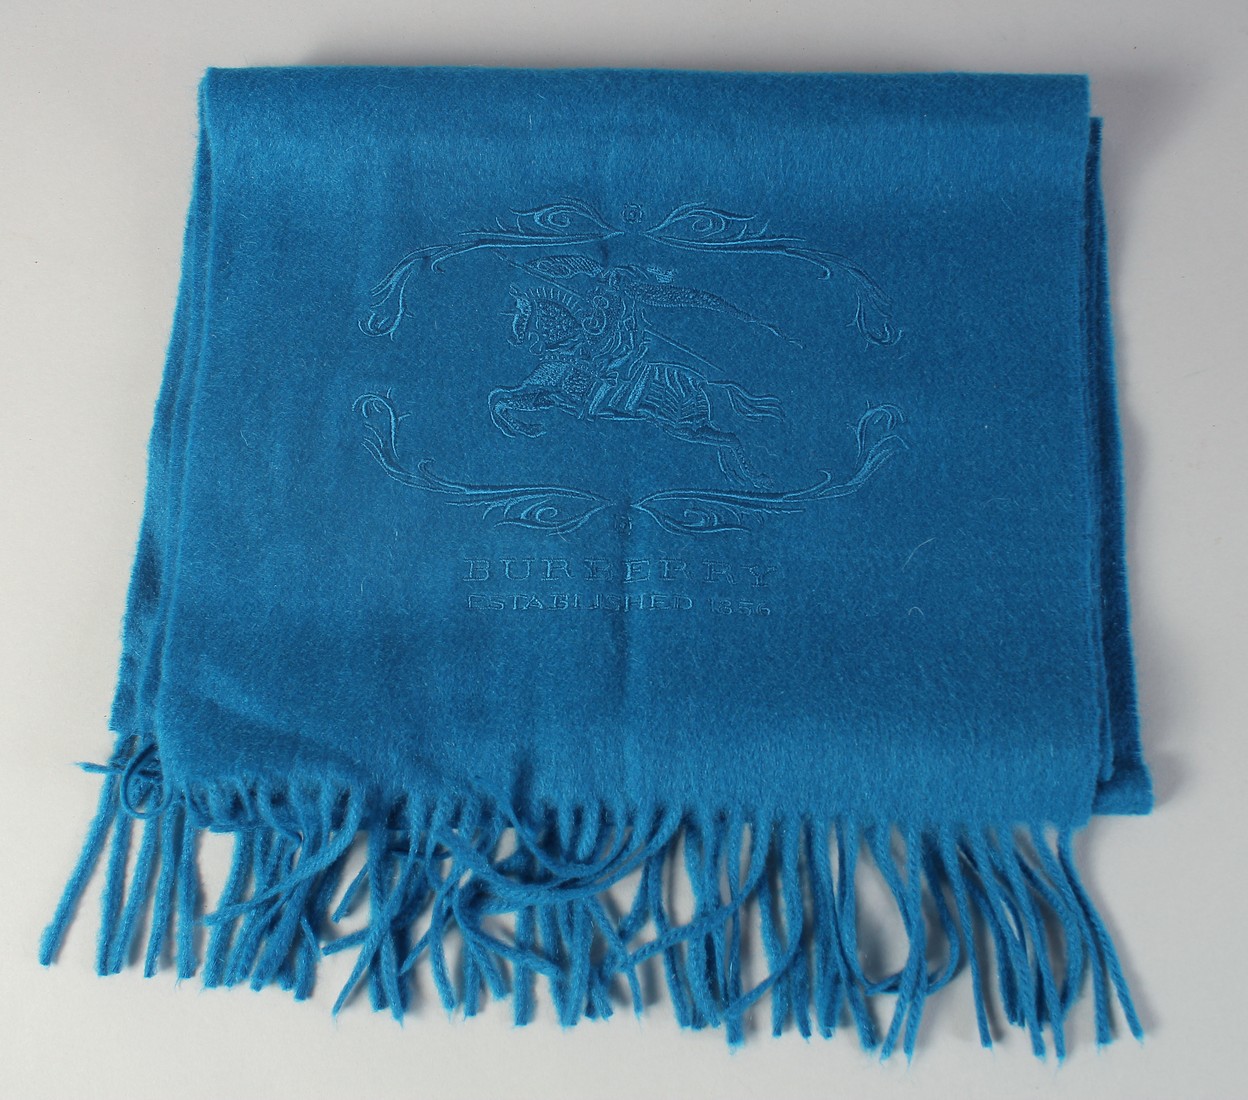 A BURBERRY BLUE CASHMERE SCARF with horse and rider design, 4ft long.